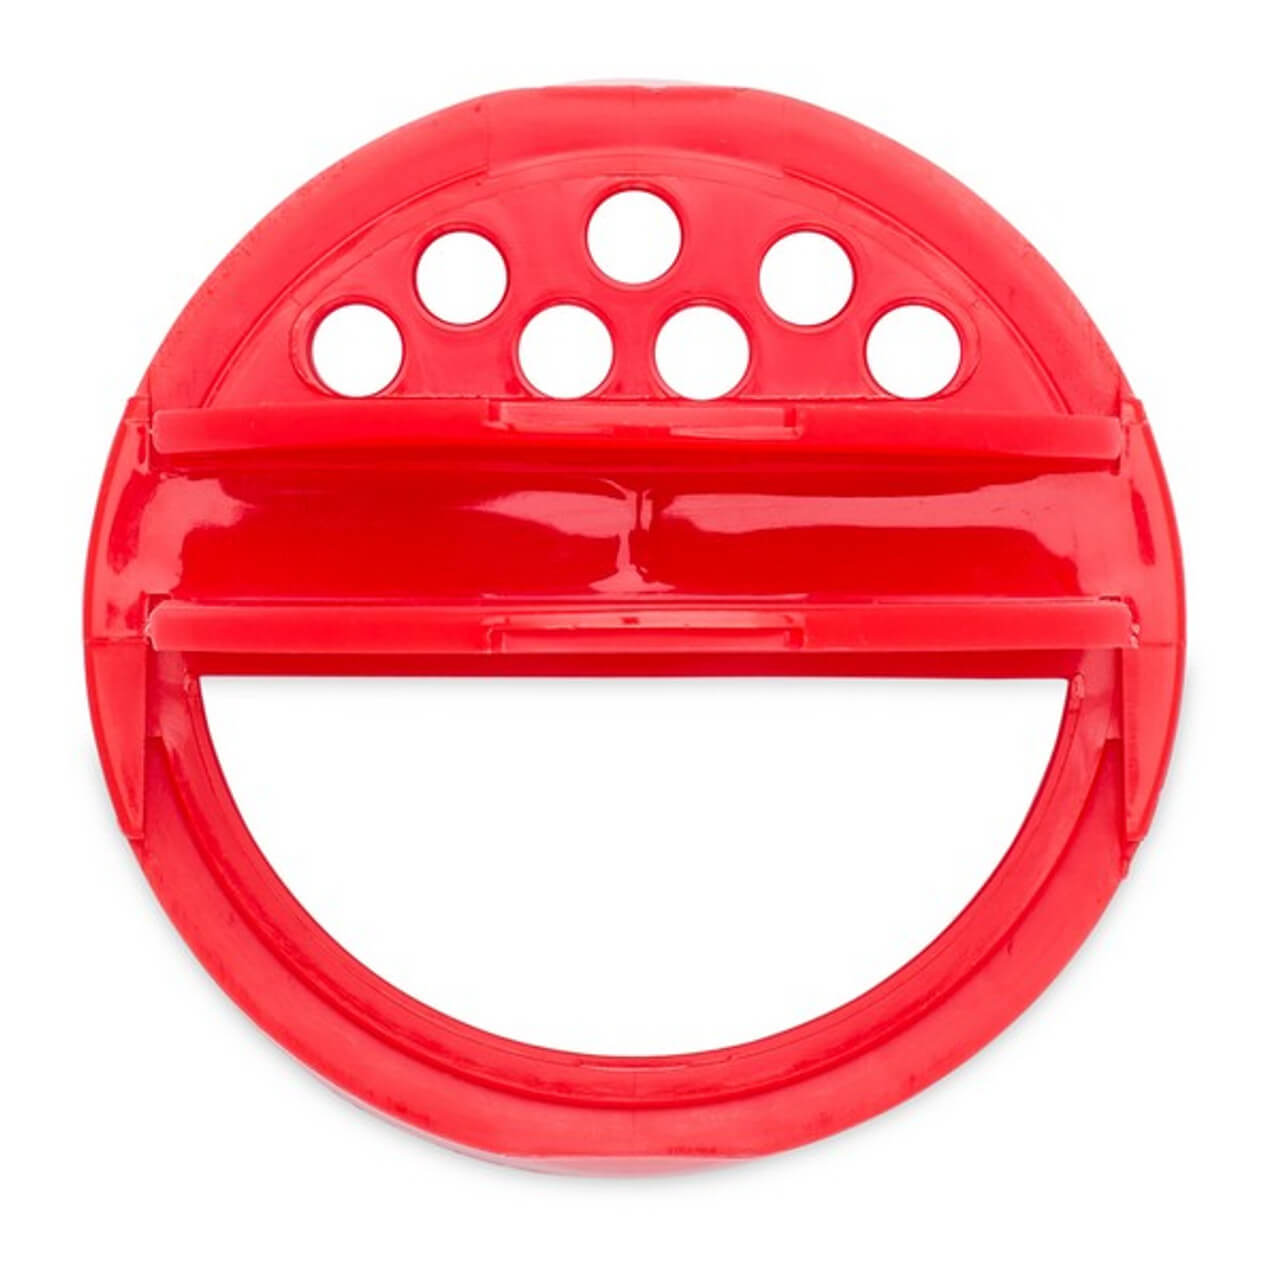 https://jarmingcollections.com/wp-content/uploads/2022/07/spice-lid-63-with-7-holes-upclose-red-1.jpg